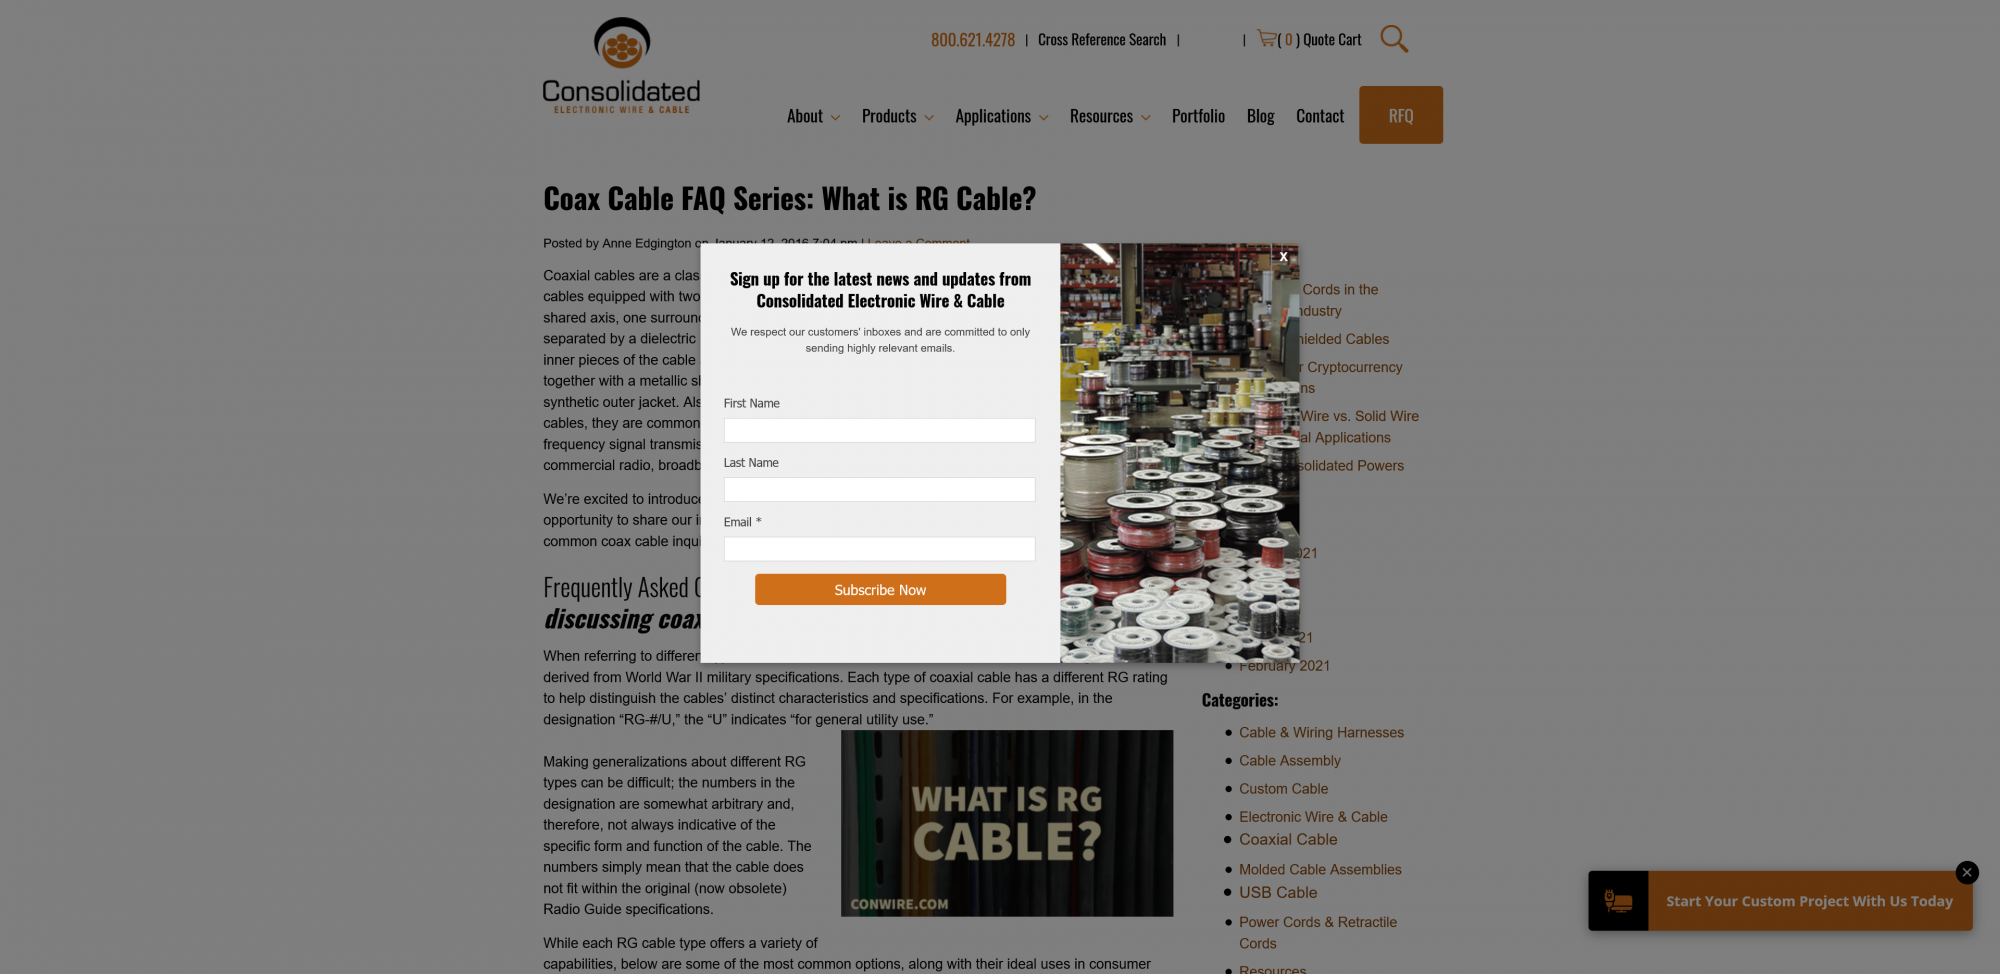 Screenshot 2021-08-11 at 17-29-28 Coax Cable FAQ Series What is RG Cable - Consolidated Electr...png